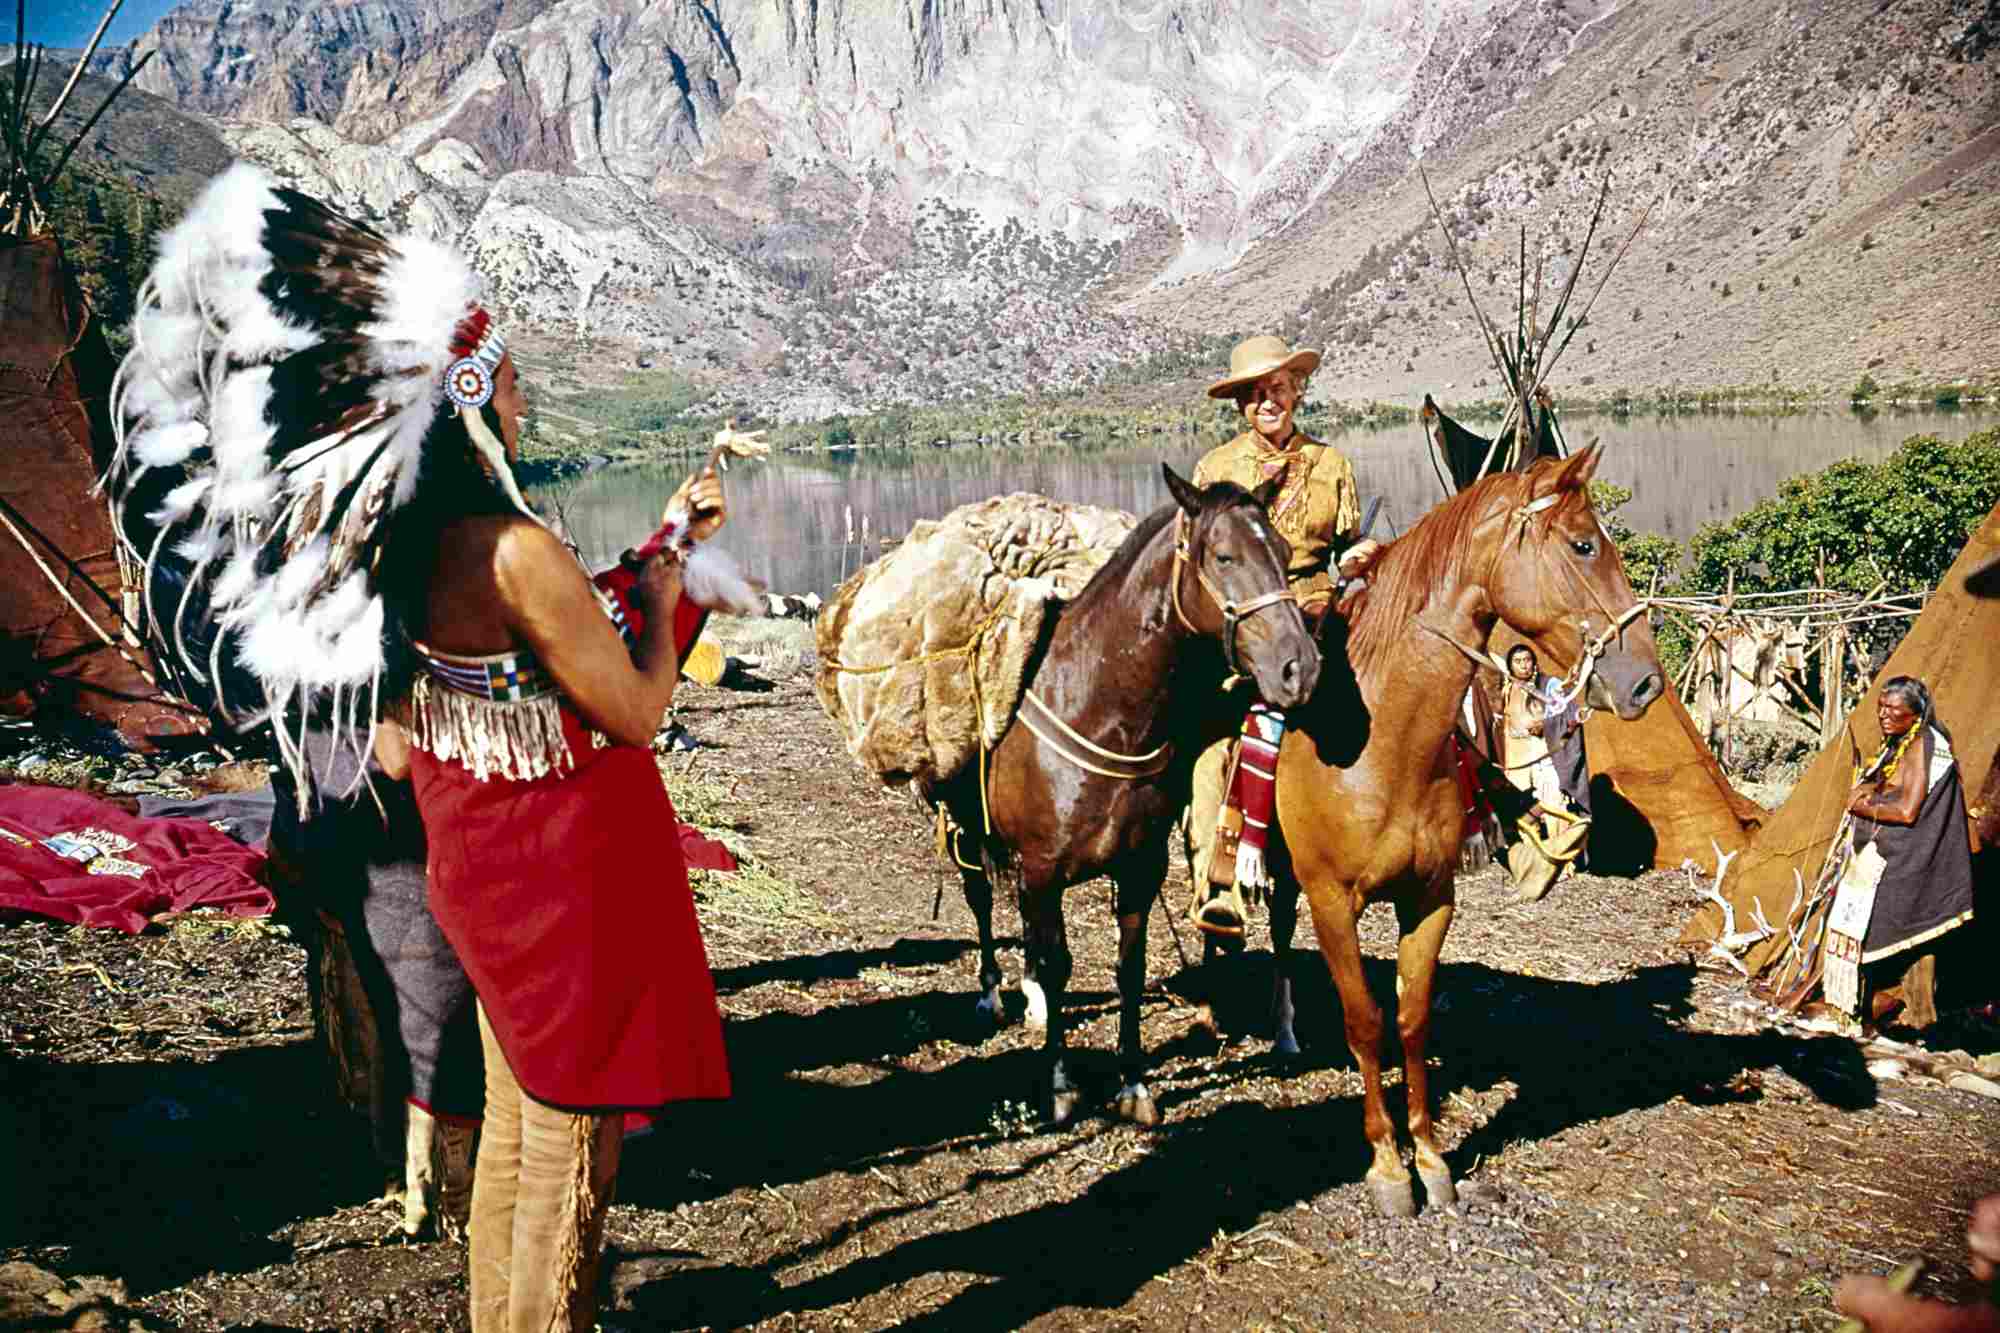 'How the West Was Won' James Stewart as Linus Rawlings on a horse standing in front of a Native American man in tribal dress.